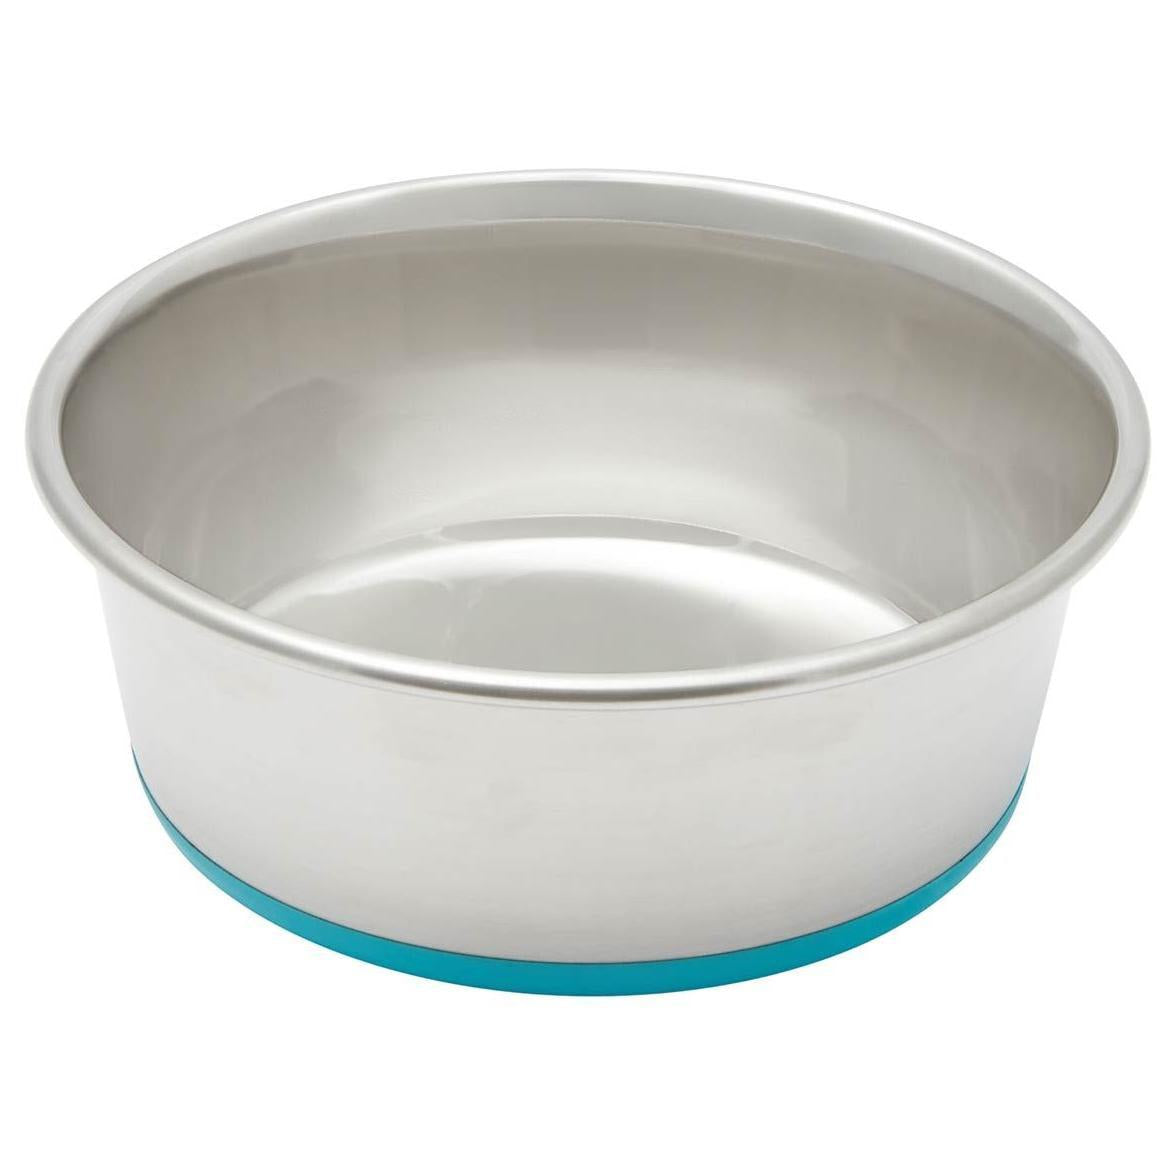 Lexi & Me Stainless Steel Bowl Silicone Base